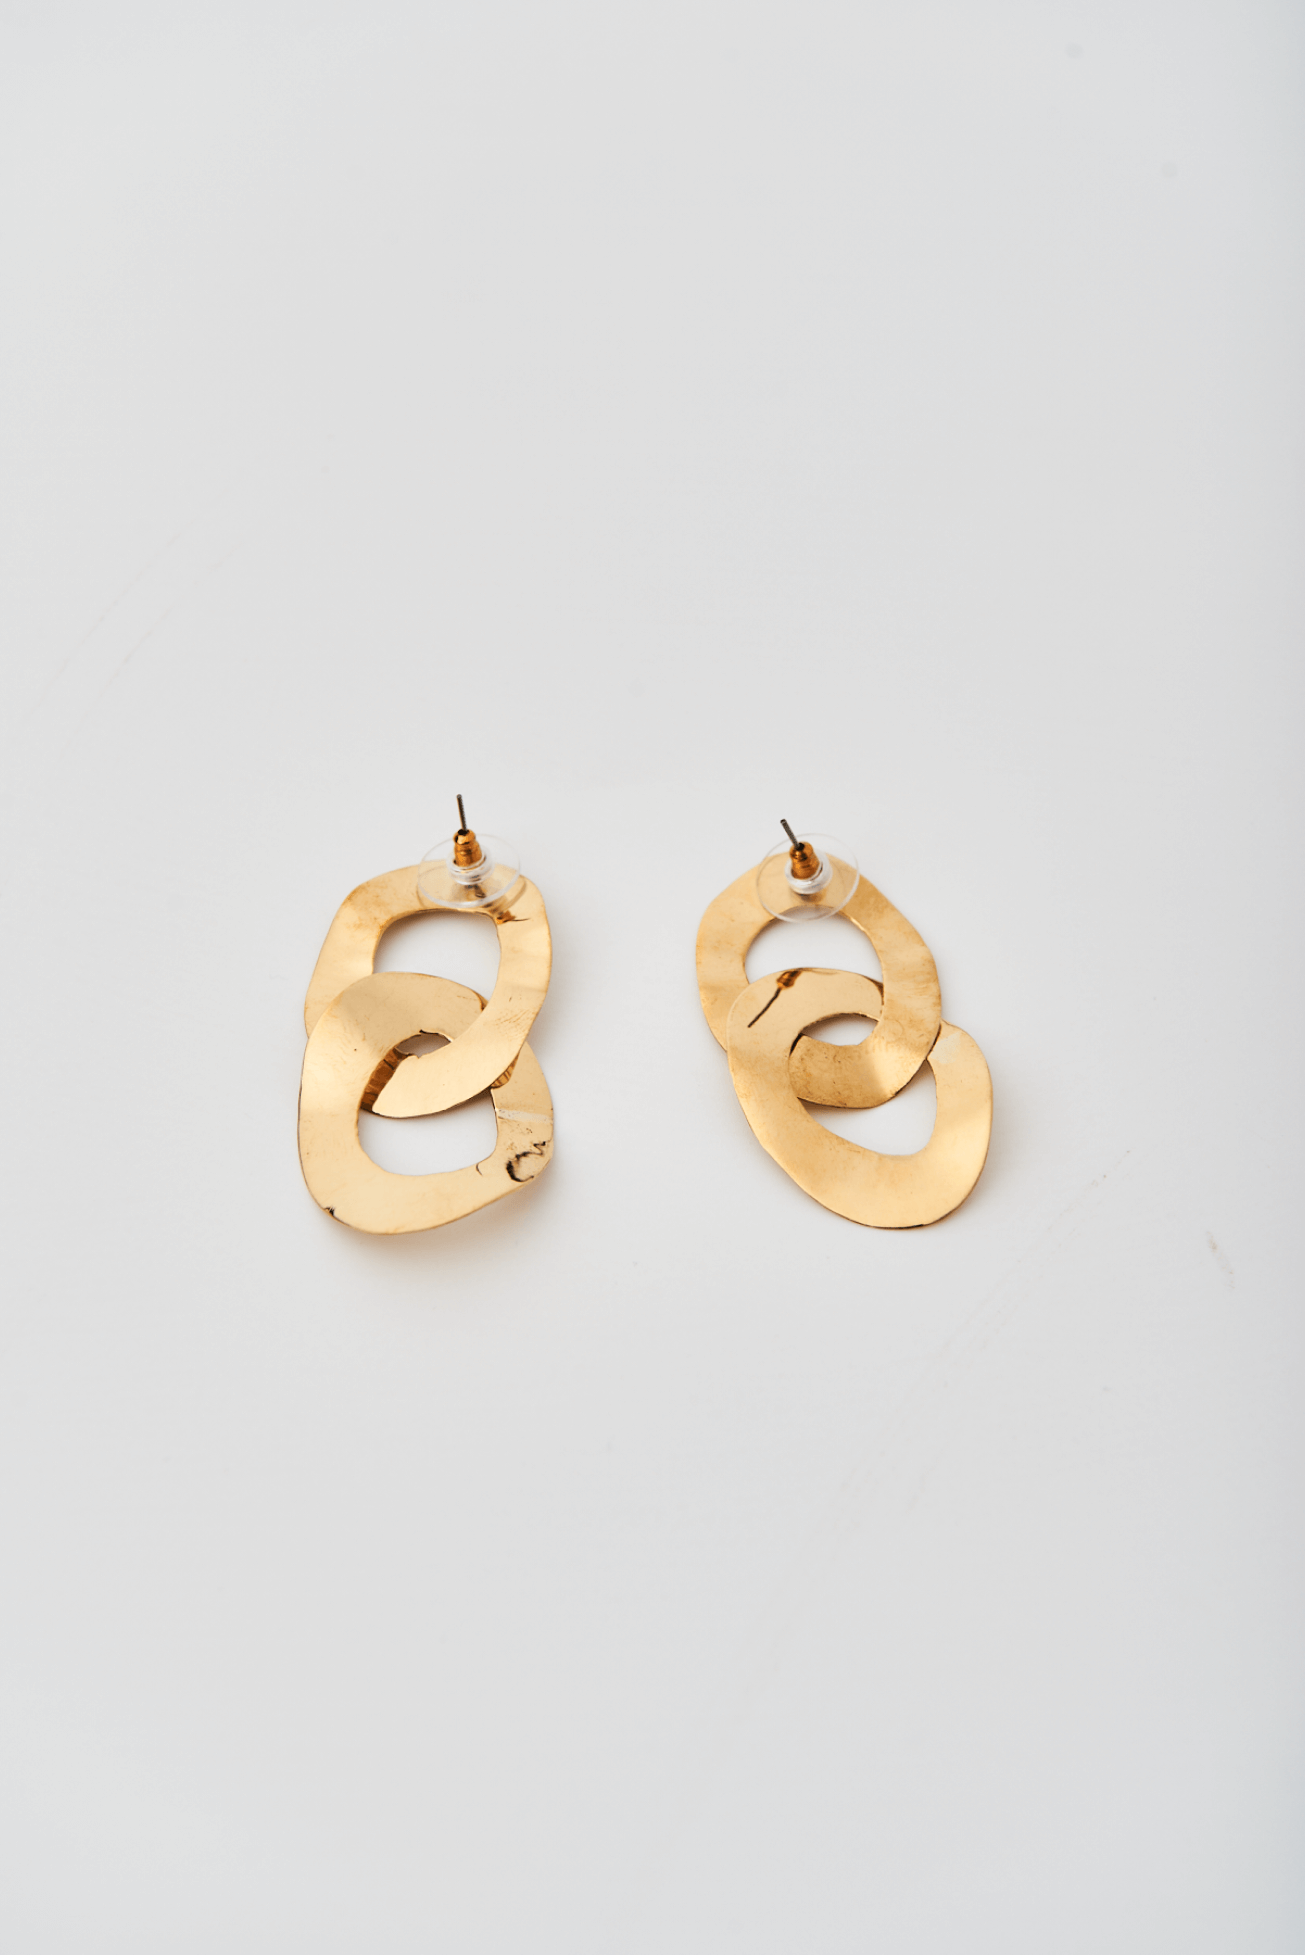 Shop Lianne Earrings by We Are NBO on Arrai. Discover stylish, affordable clothing, jewelry, handbags and unique handmade pieces from top Kenyan & African fashion brands prioritising sustainability and quality craftsmanship.